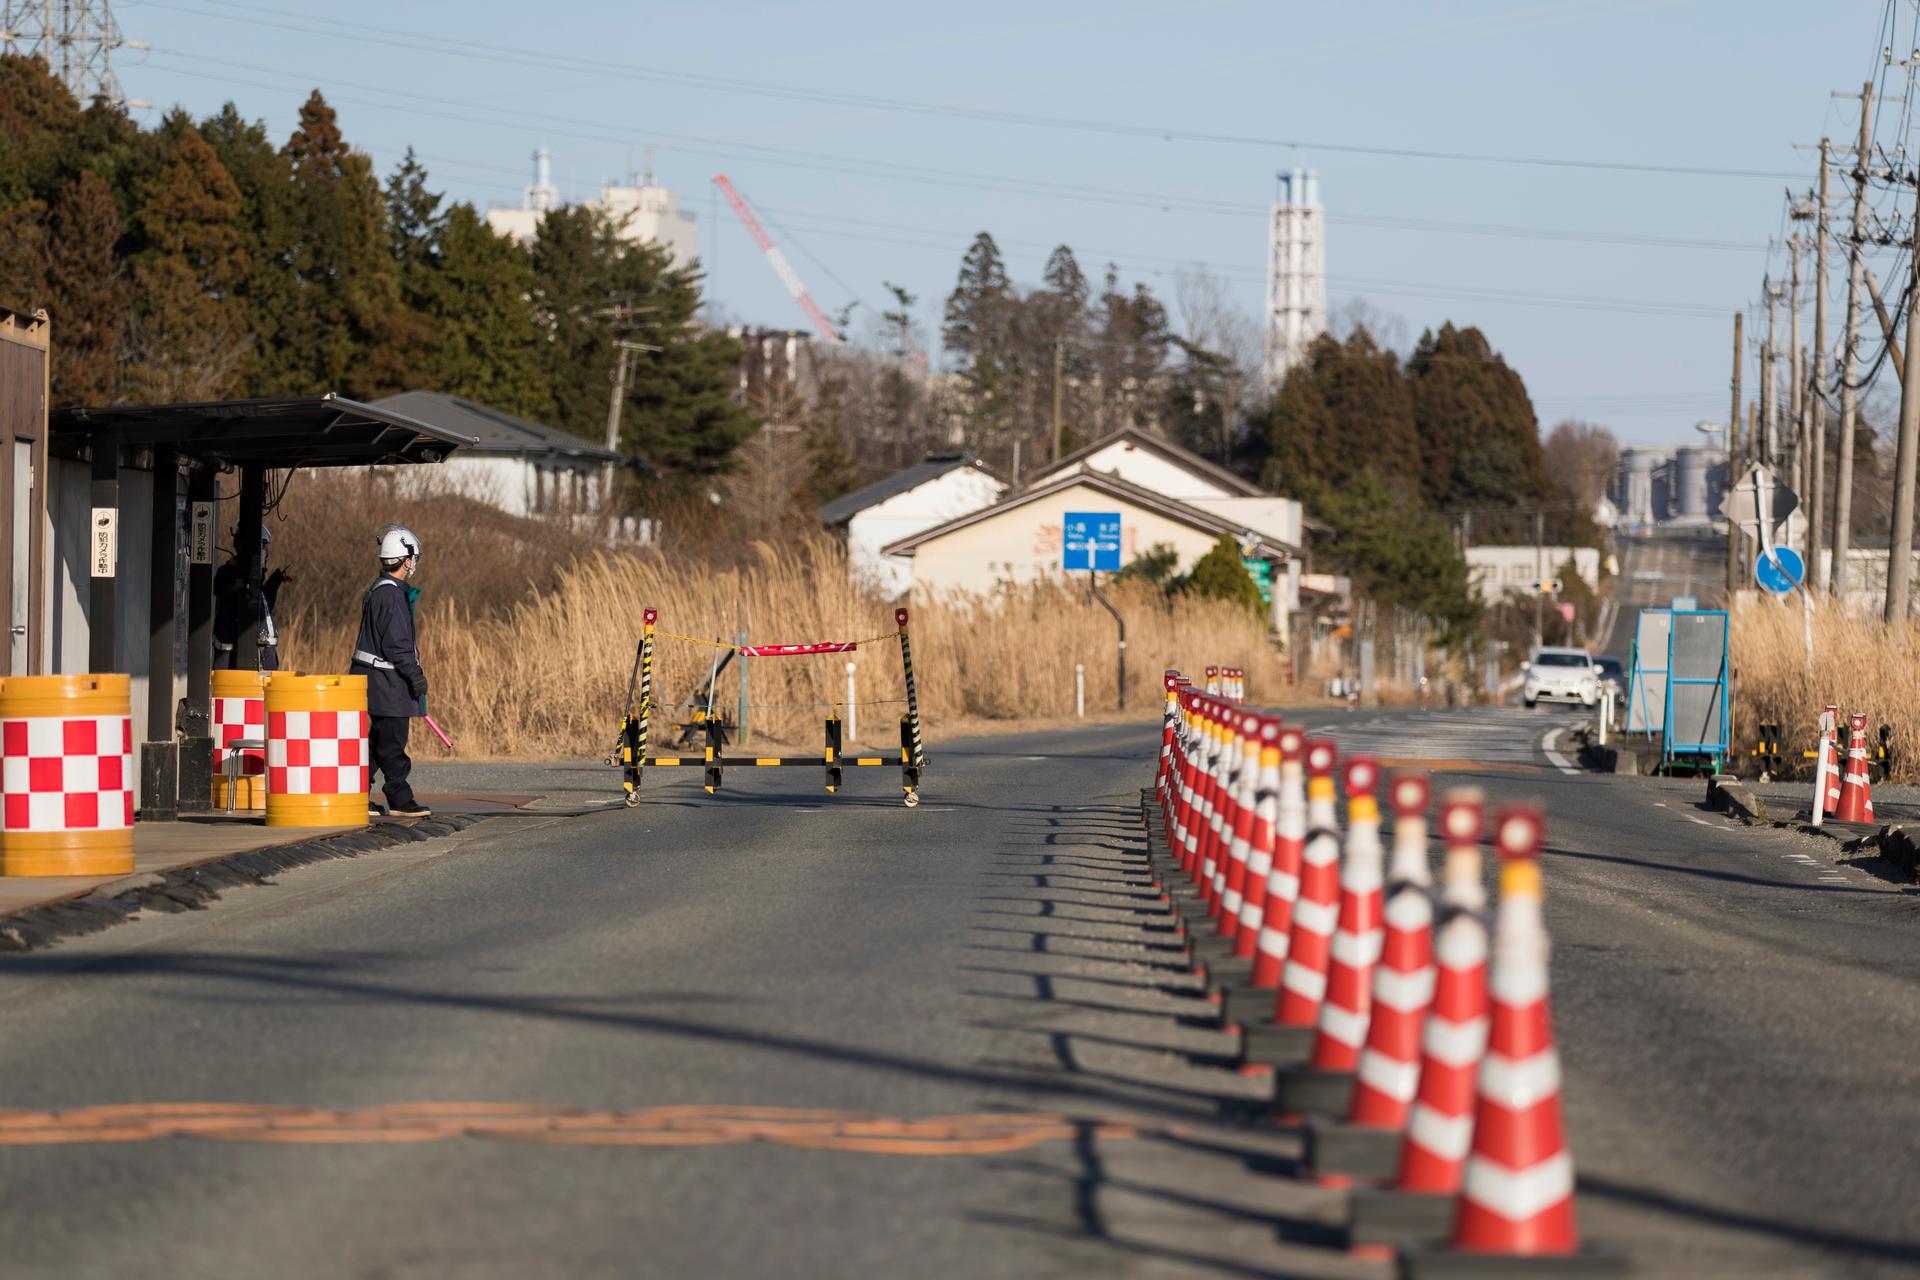 Security guards look at outbound vehicles moving toward them at a security checkpoint where part of the Fukushima Daiichi nuclear power plant is seen in the background in Okuma town in Fukushima prefecture, northeastern Japan, Feb. 25, 2021. An official 